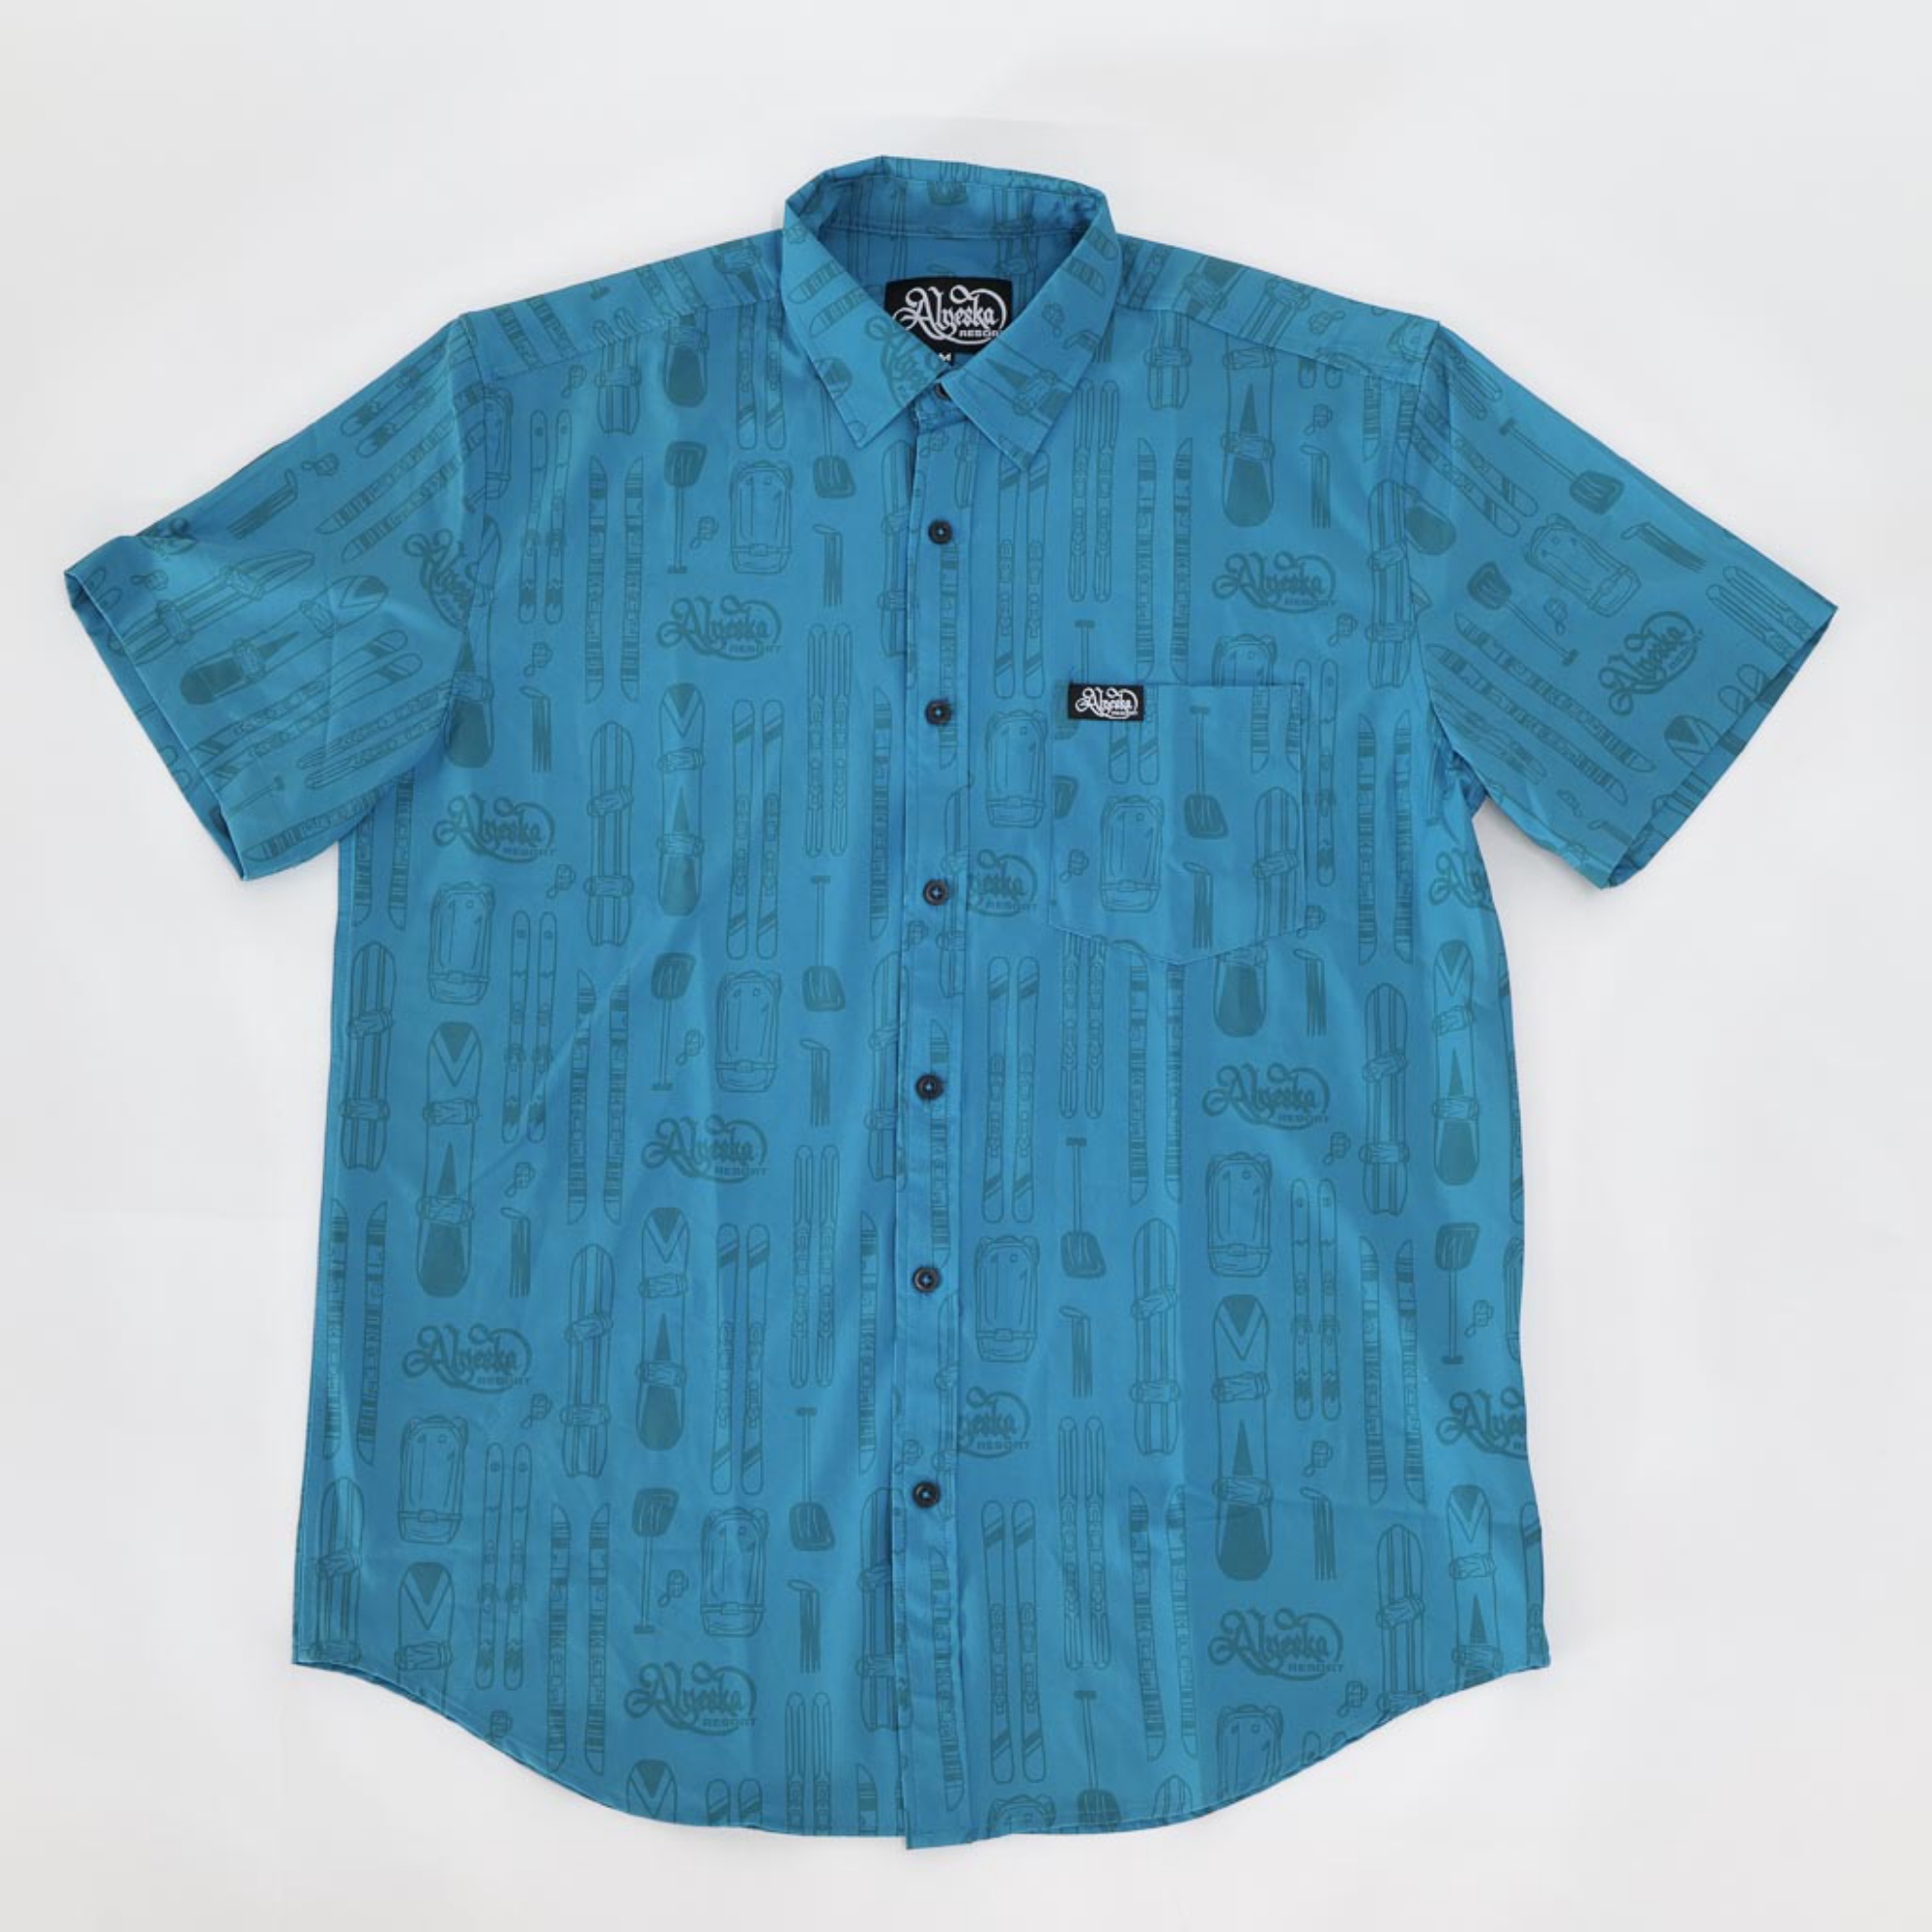 Picture of Alyeska Ski Gear Button Up